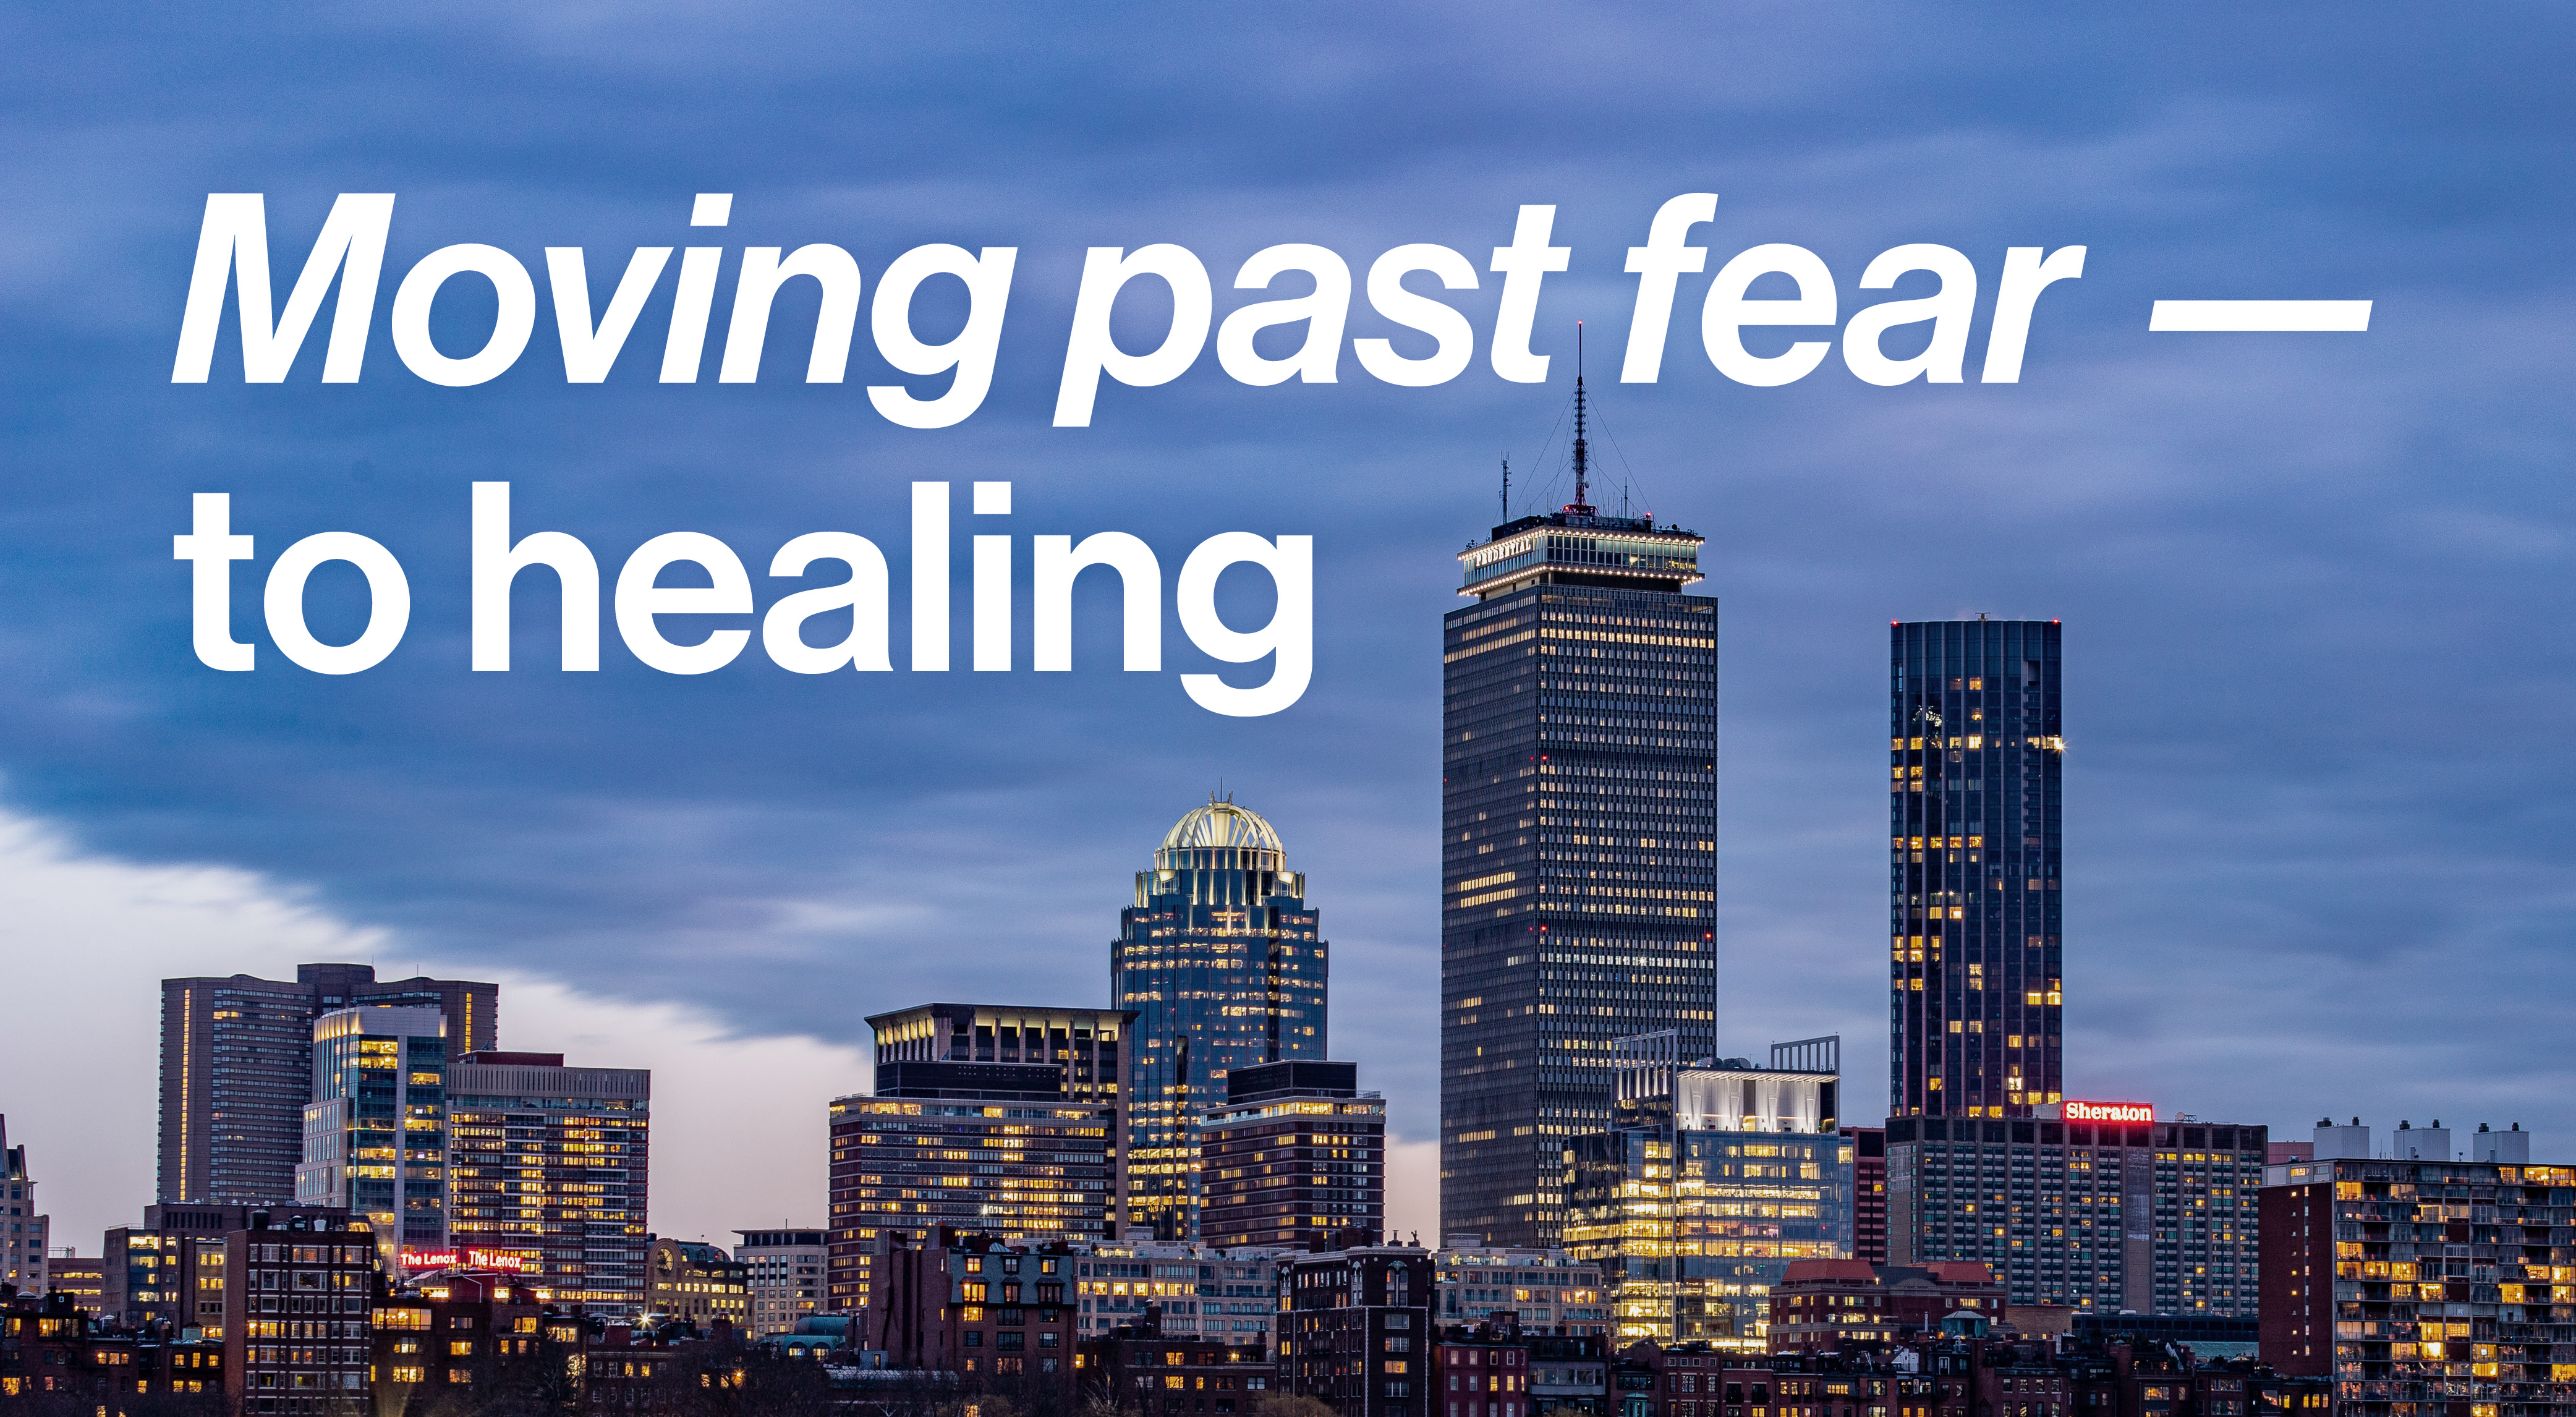 Moving past fear to healing